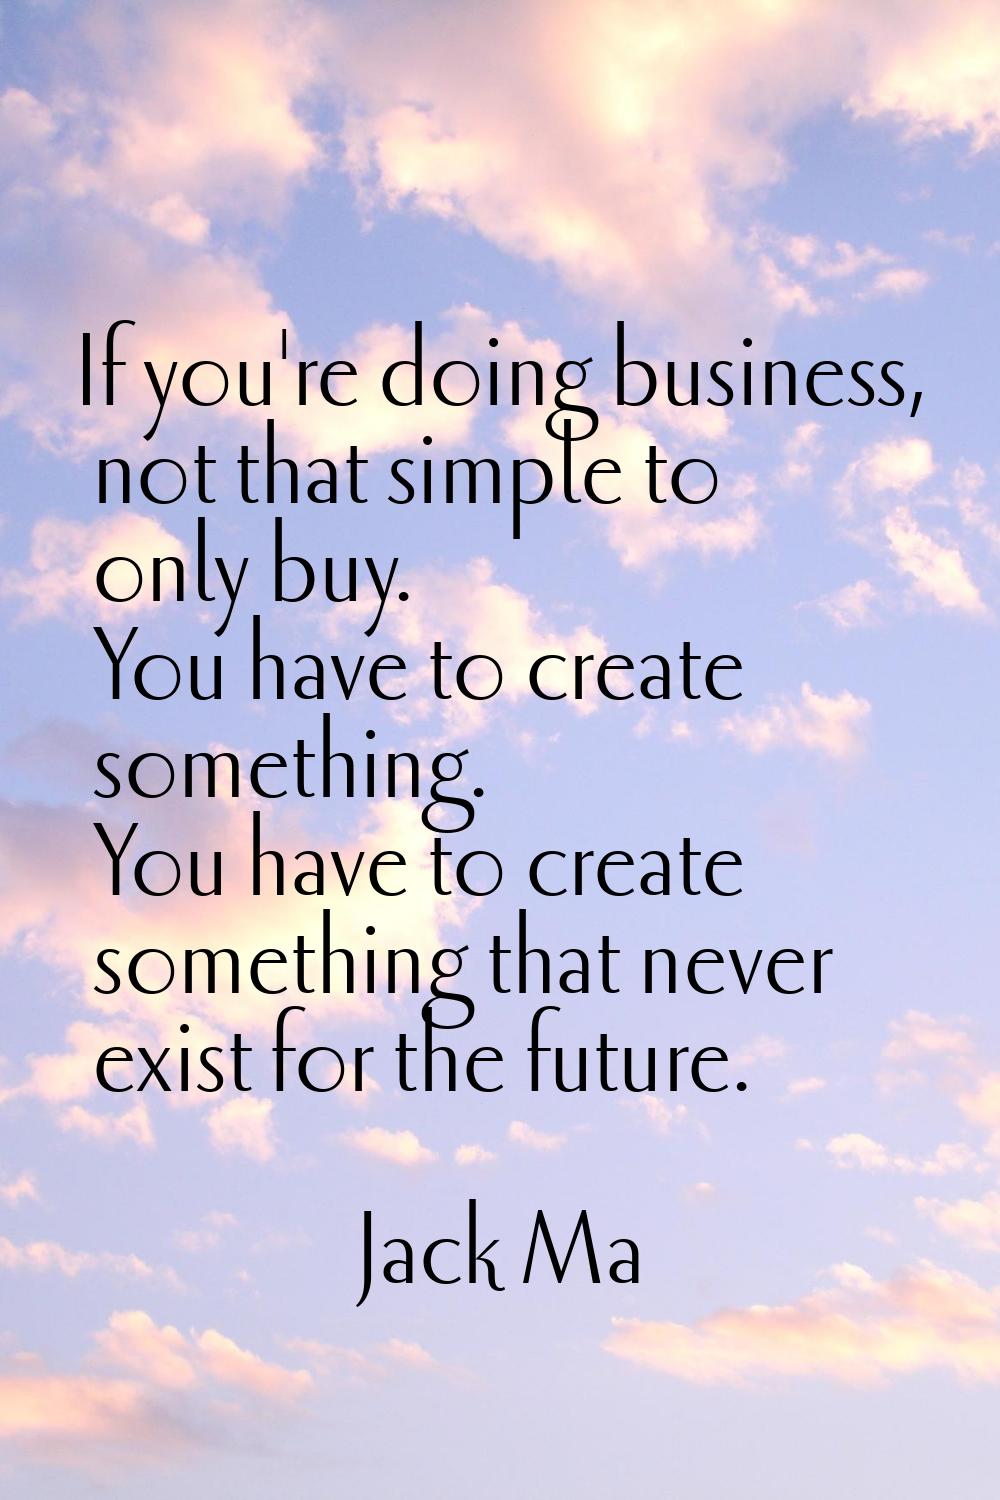 If you're doing business, not that simple to only buy. You have to create something. You have to cr